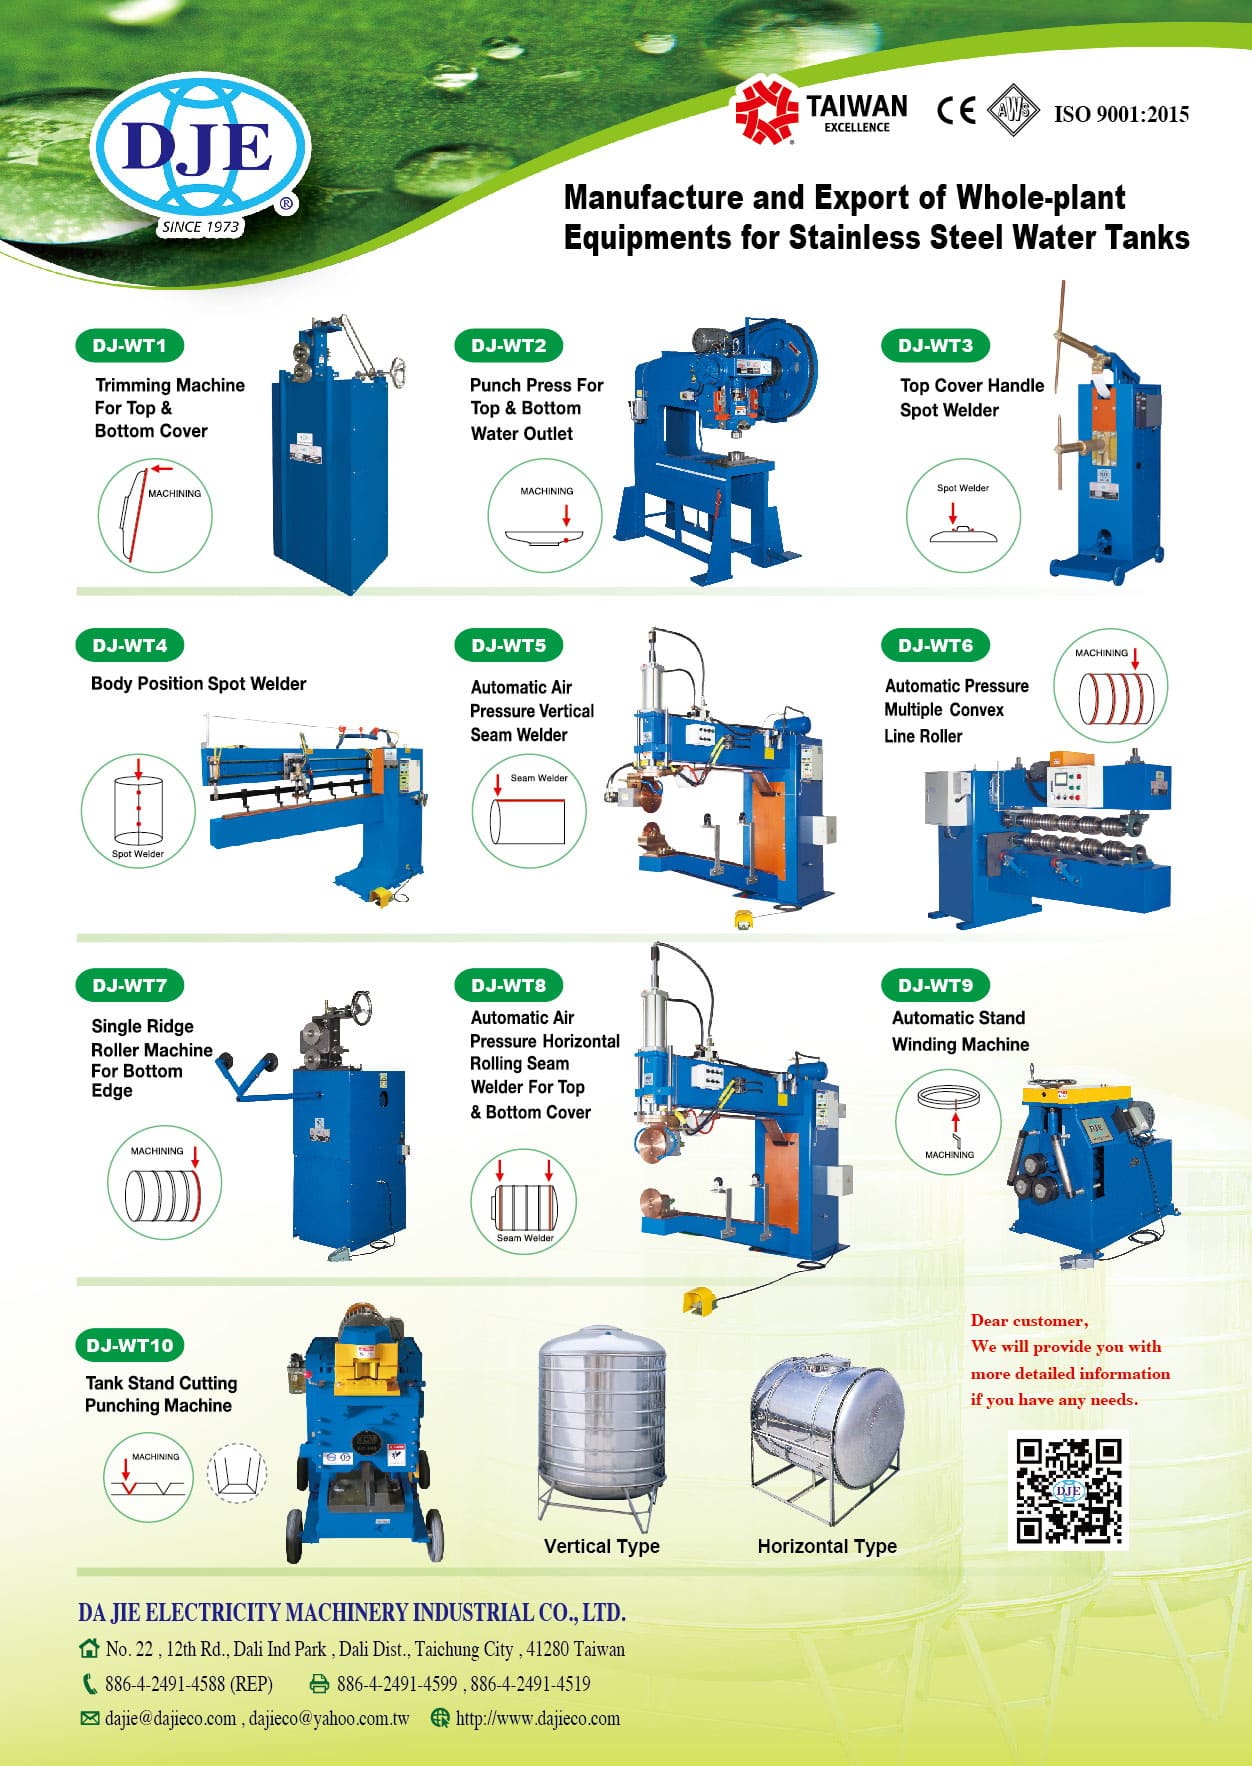 Whole-plant Equipment for Stainless Steel Water Tanks-DJ-WT